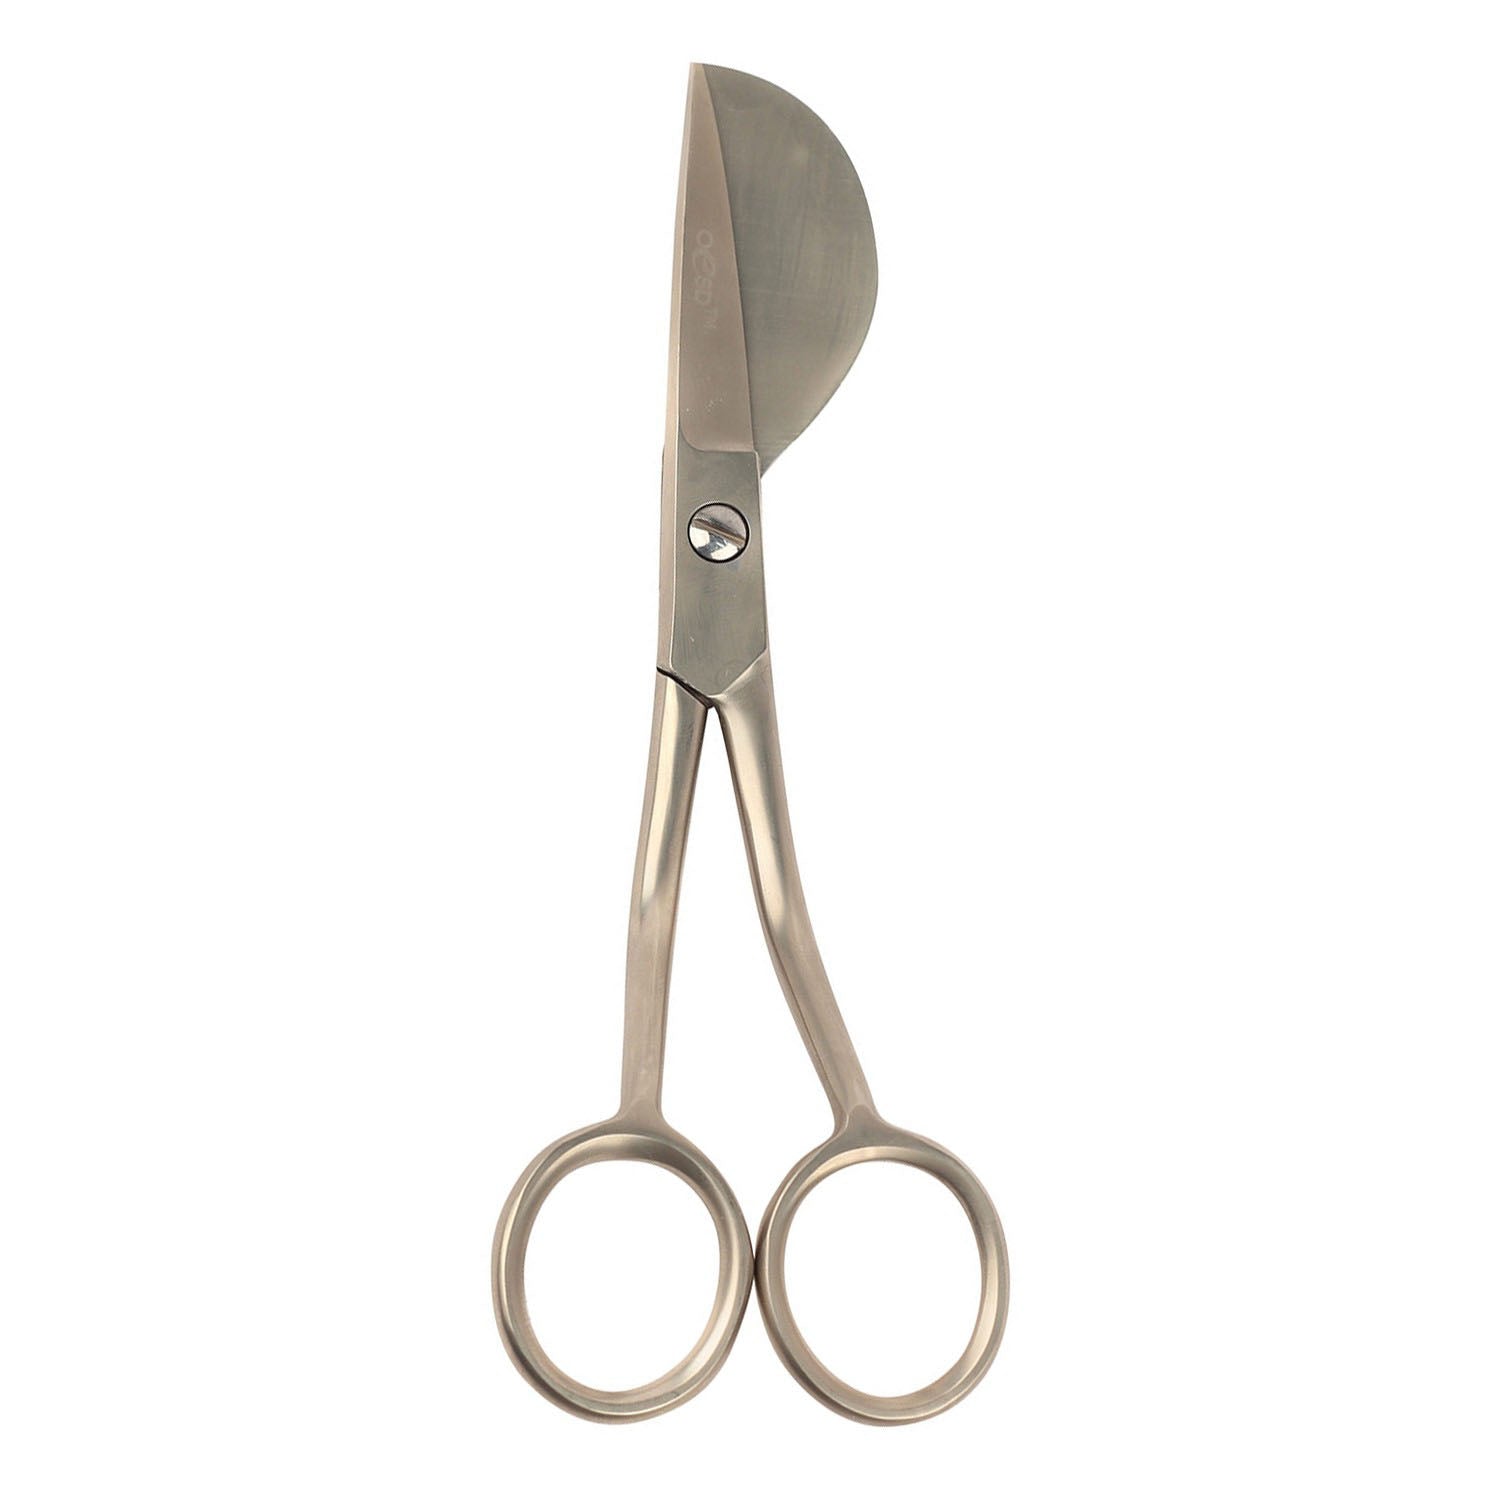 What are duckbill scissors and how do you use them?